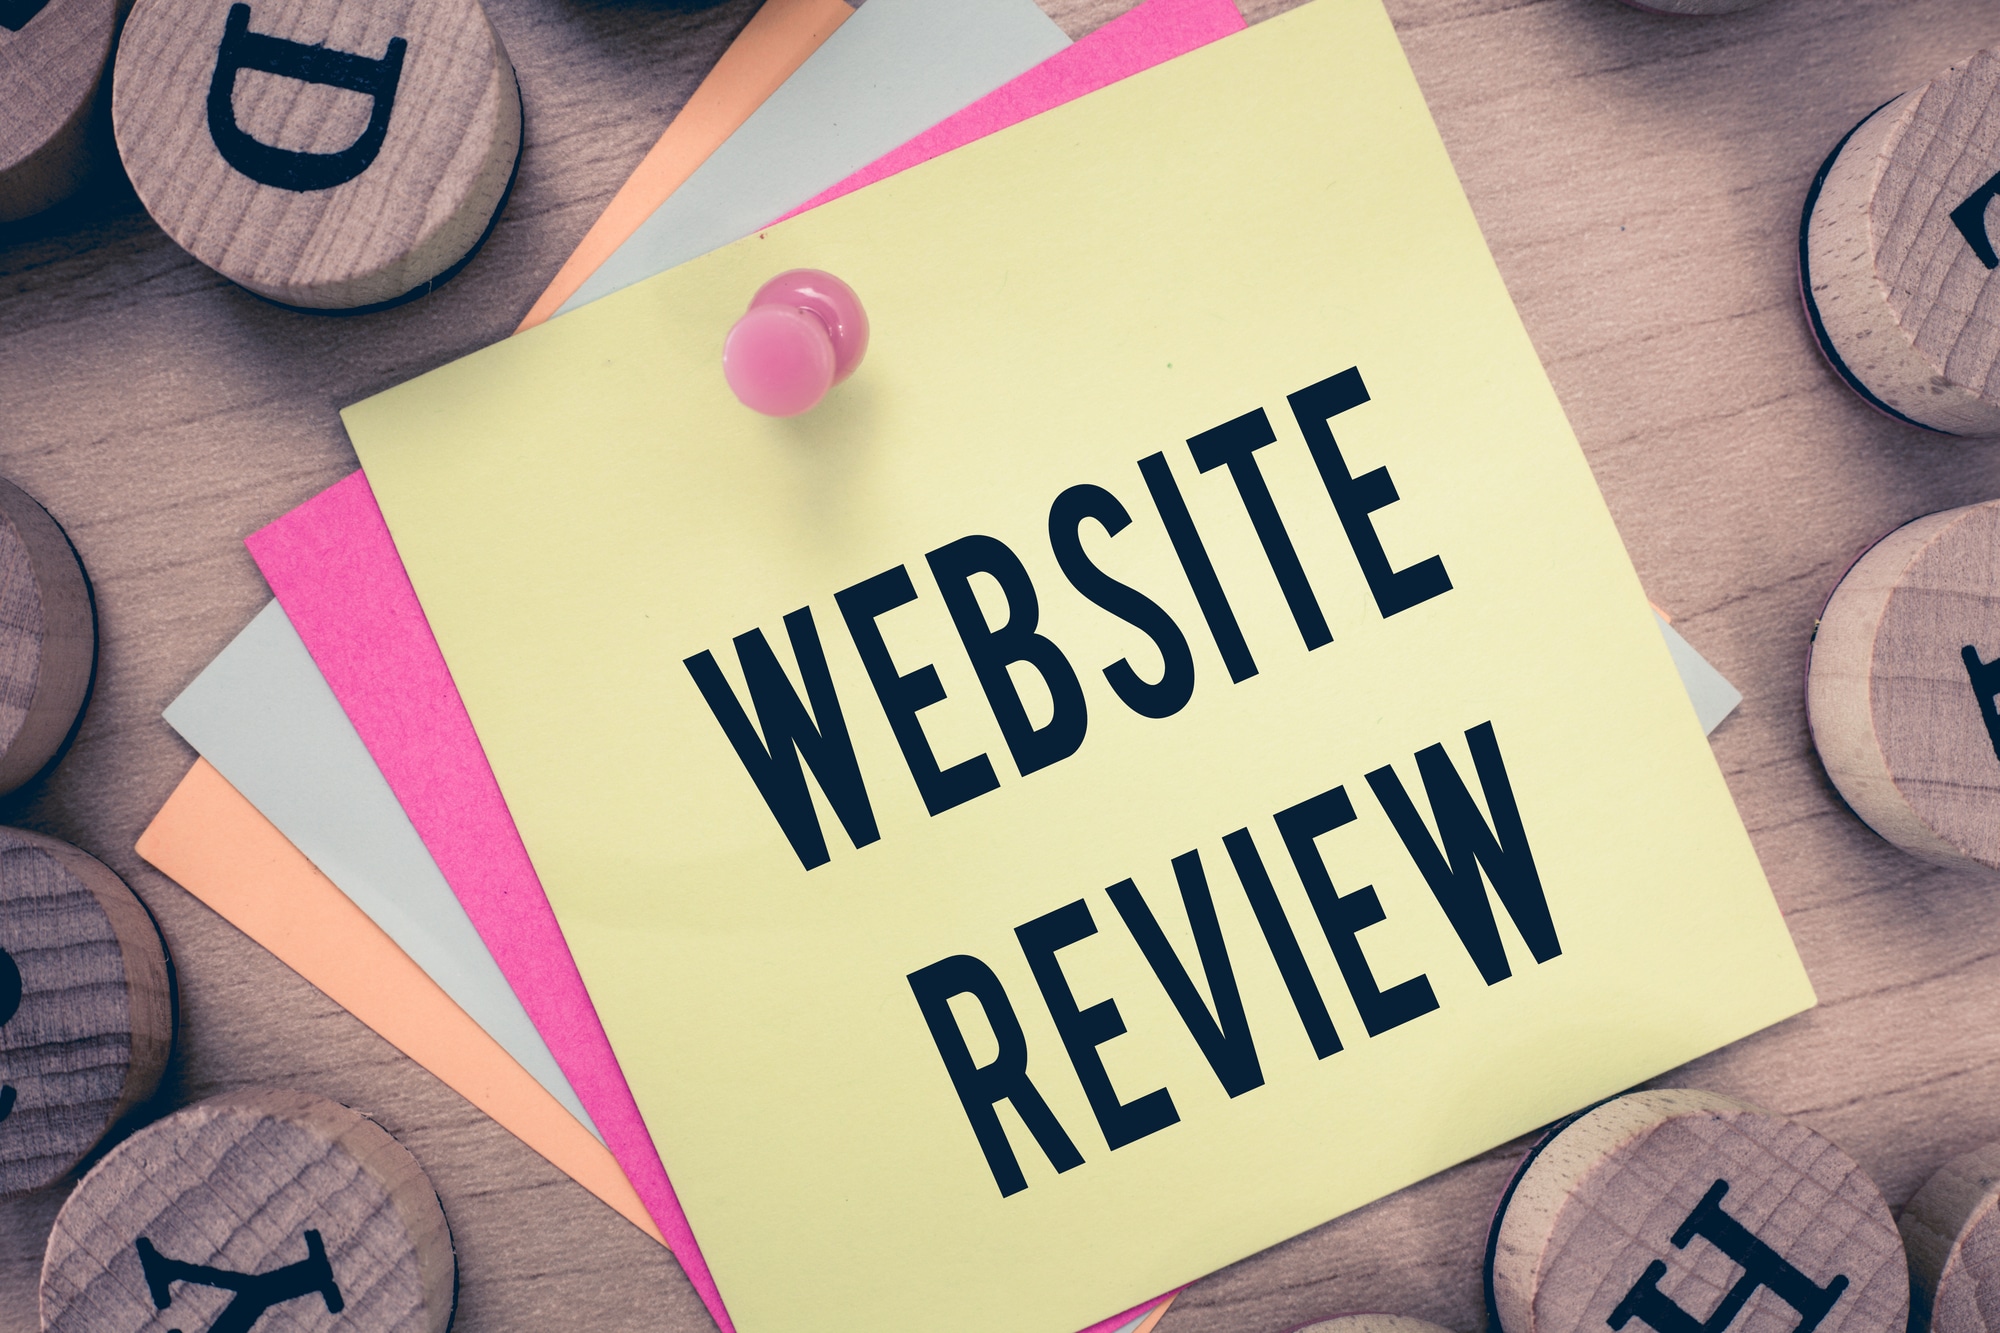 what is website review